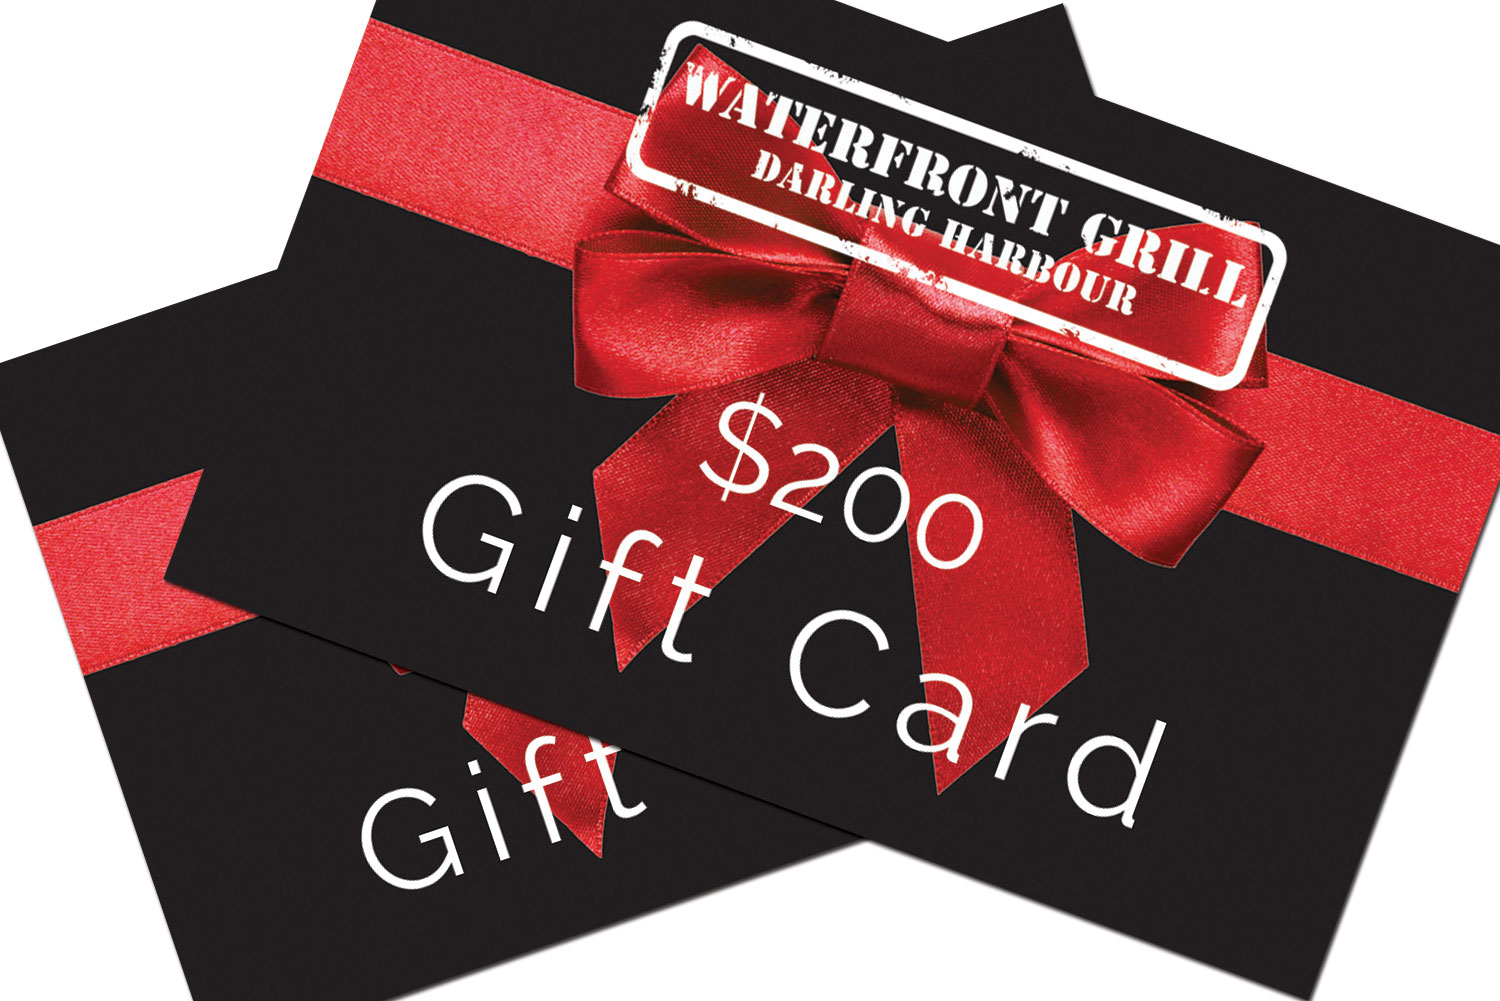 Waterfront-Grill-Gift-Card.jpg